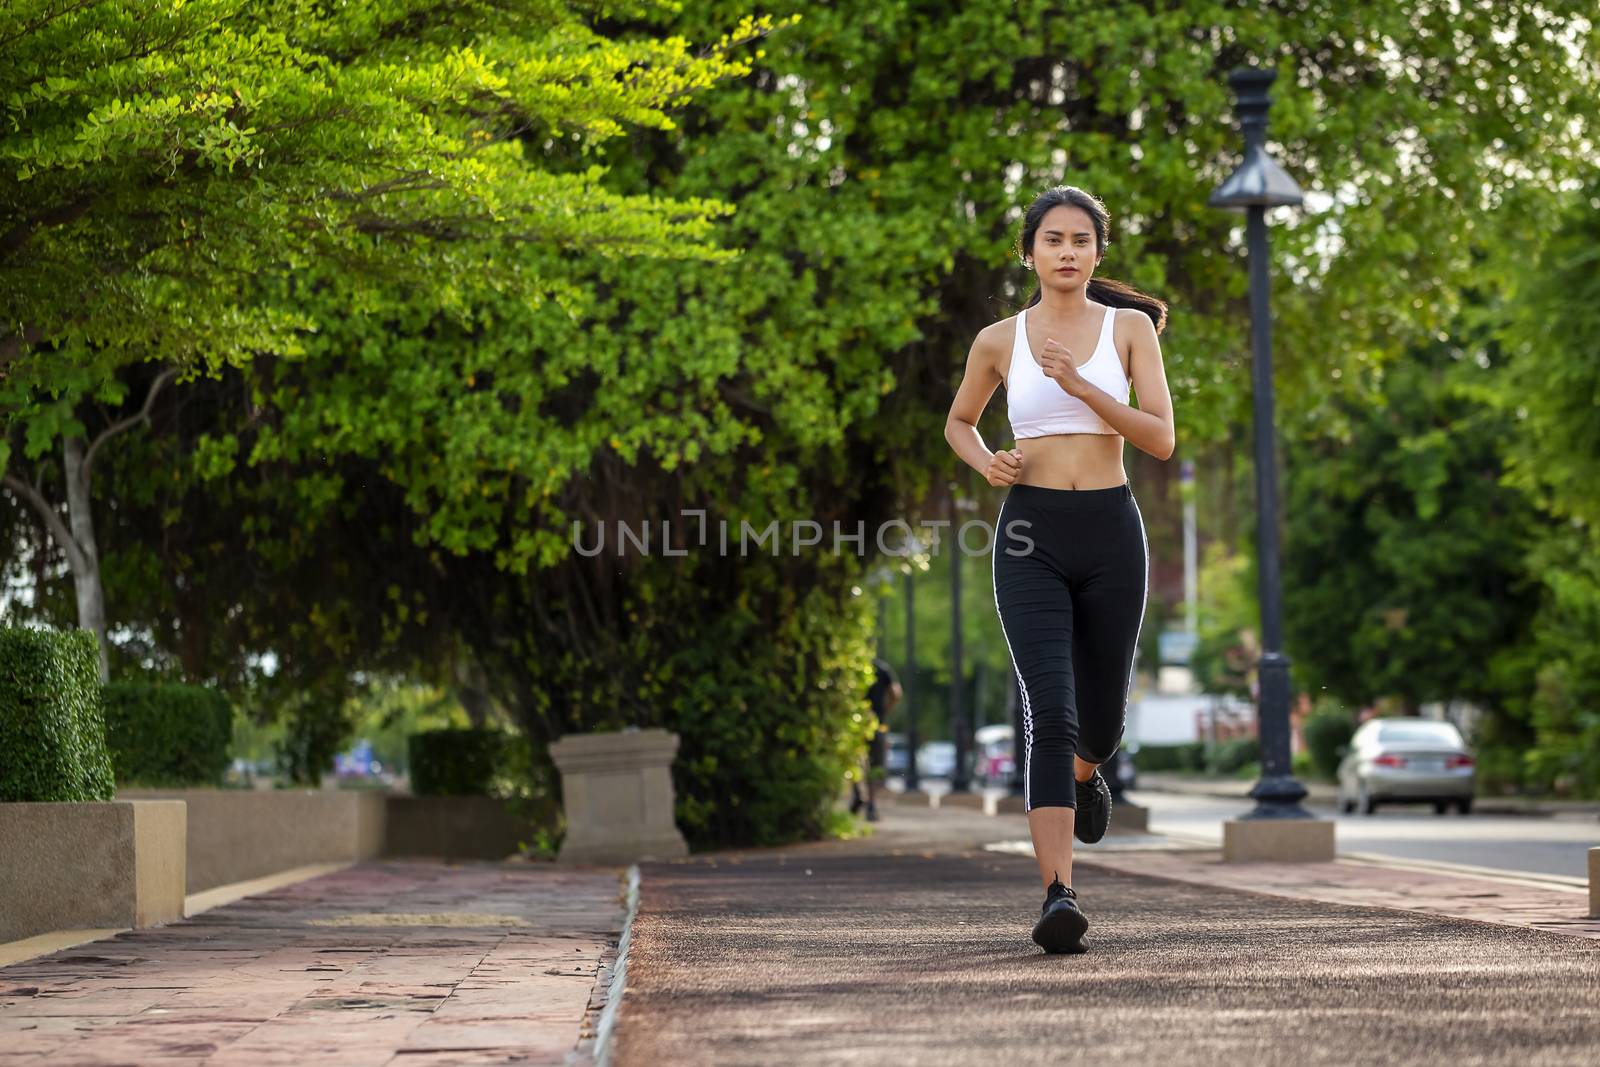 Beautiful woman jogger outdoor living healthy lifestyle in city park. Concept sport and a healthy lifestyle in the city
